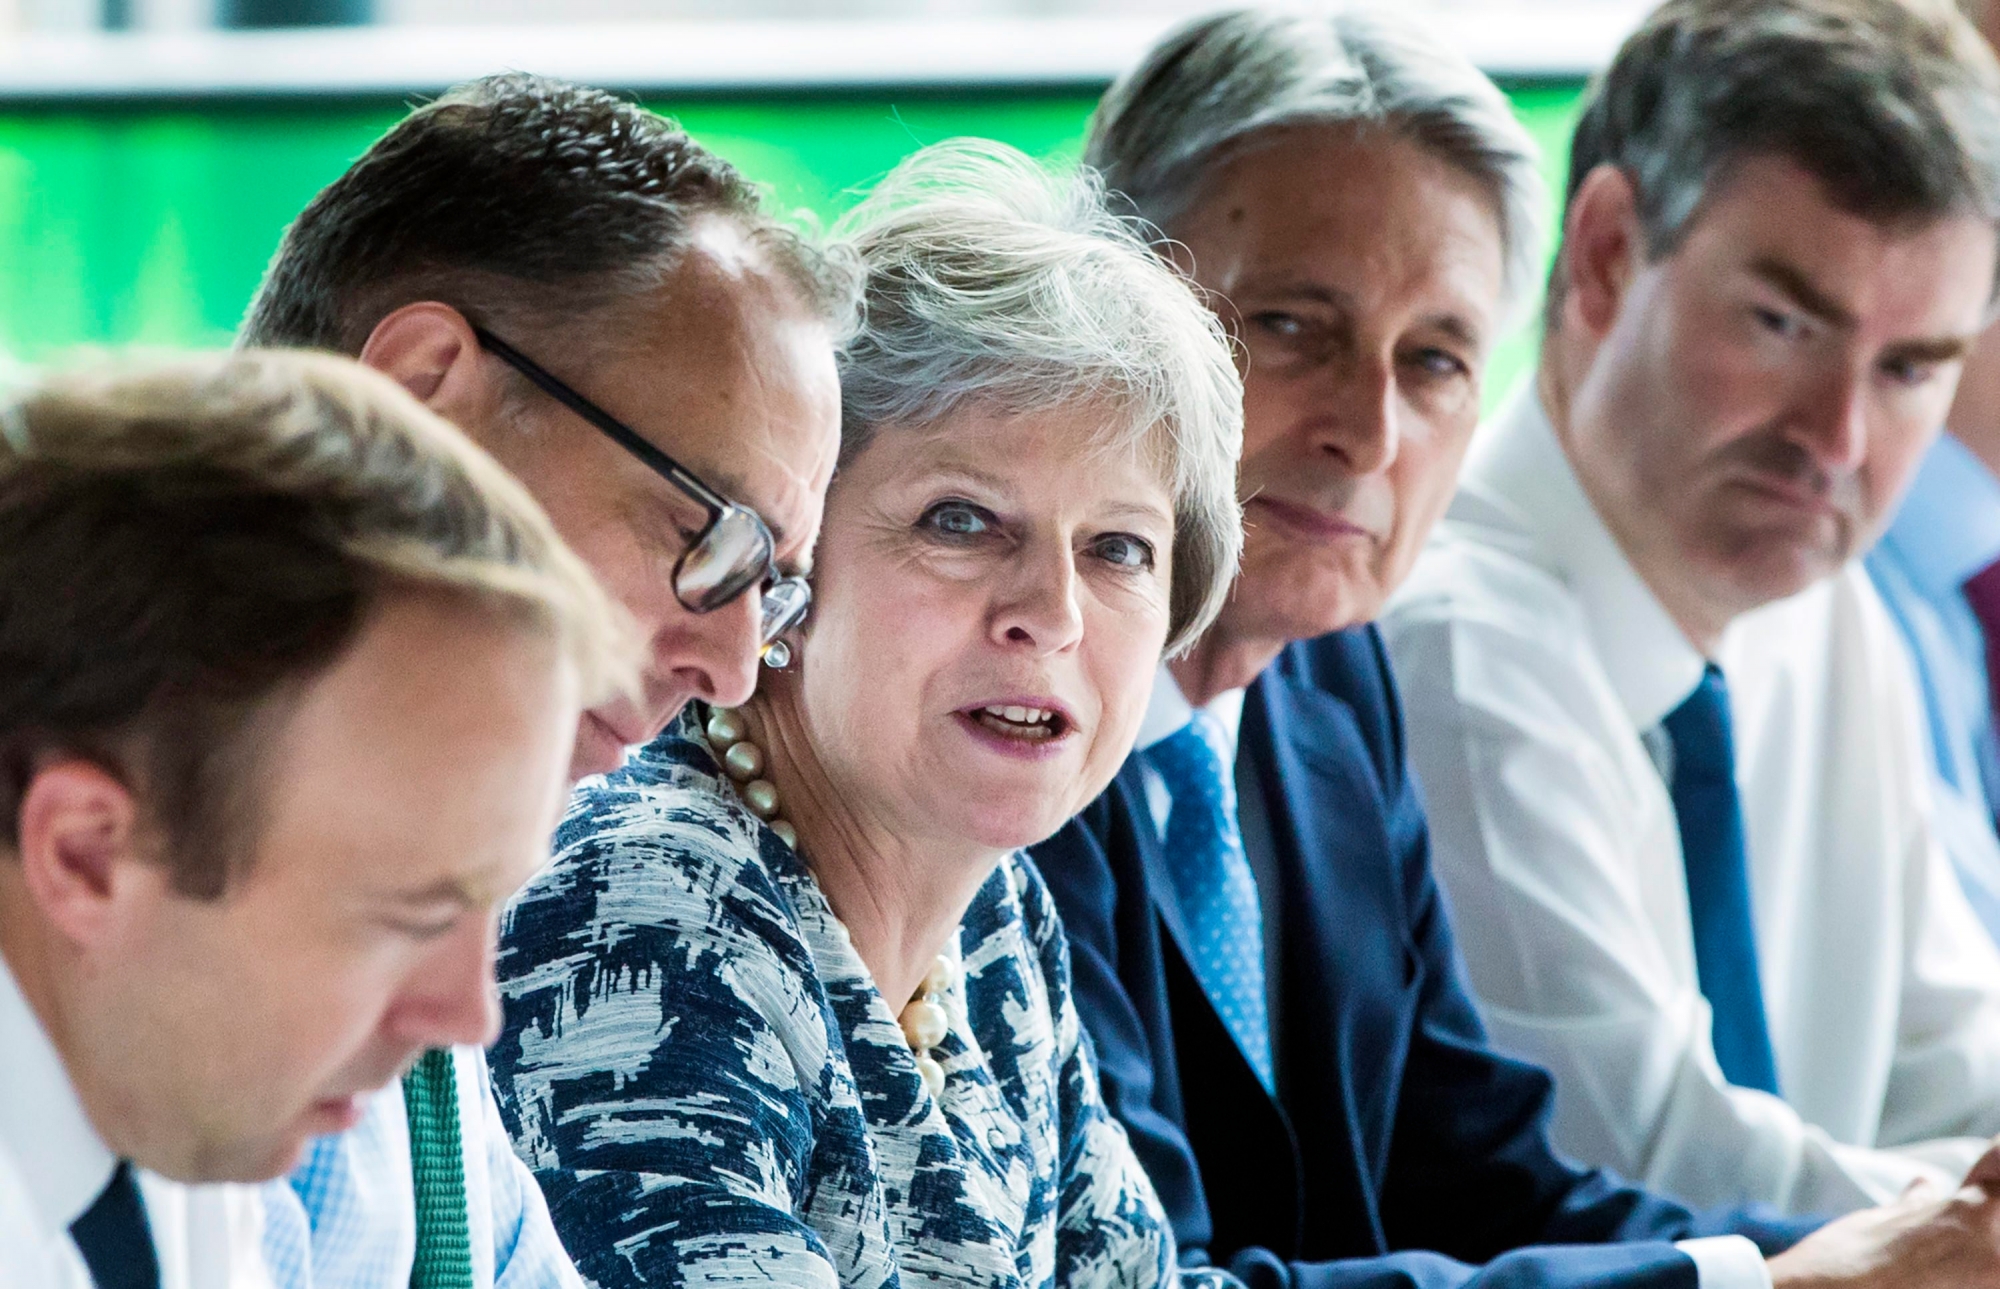 Britain's Prime Minister Theresa May holds a cabinet meeting at Sage Gateshead, England, Monday July 23, 2018, with Secretary of State for Exiting the European Union Dominic Raab, second left, and Chancellor of the Exchequer Philip Hammond, 2nd right.  May has faced a substantial rebellion from party colleagues over Britain's Brexit split from Europe. (Danny Lawson/PA via AP) Britain May Cabinet